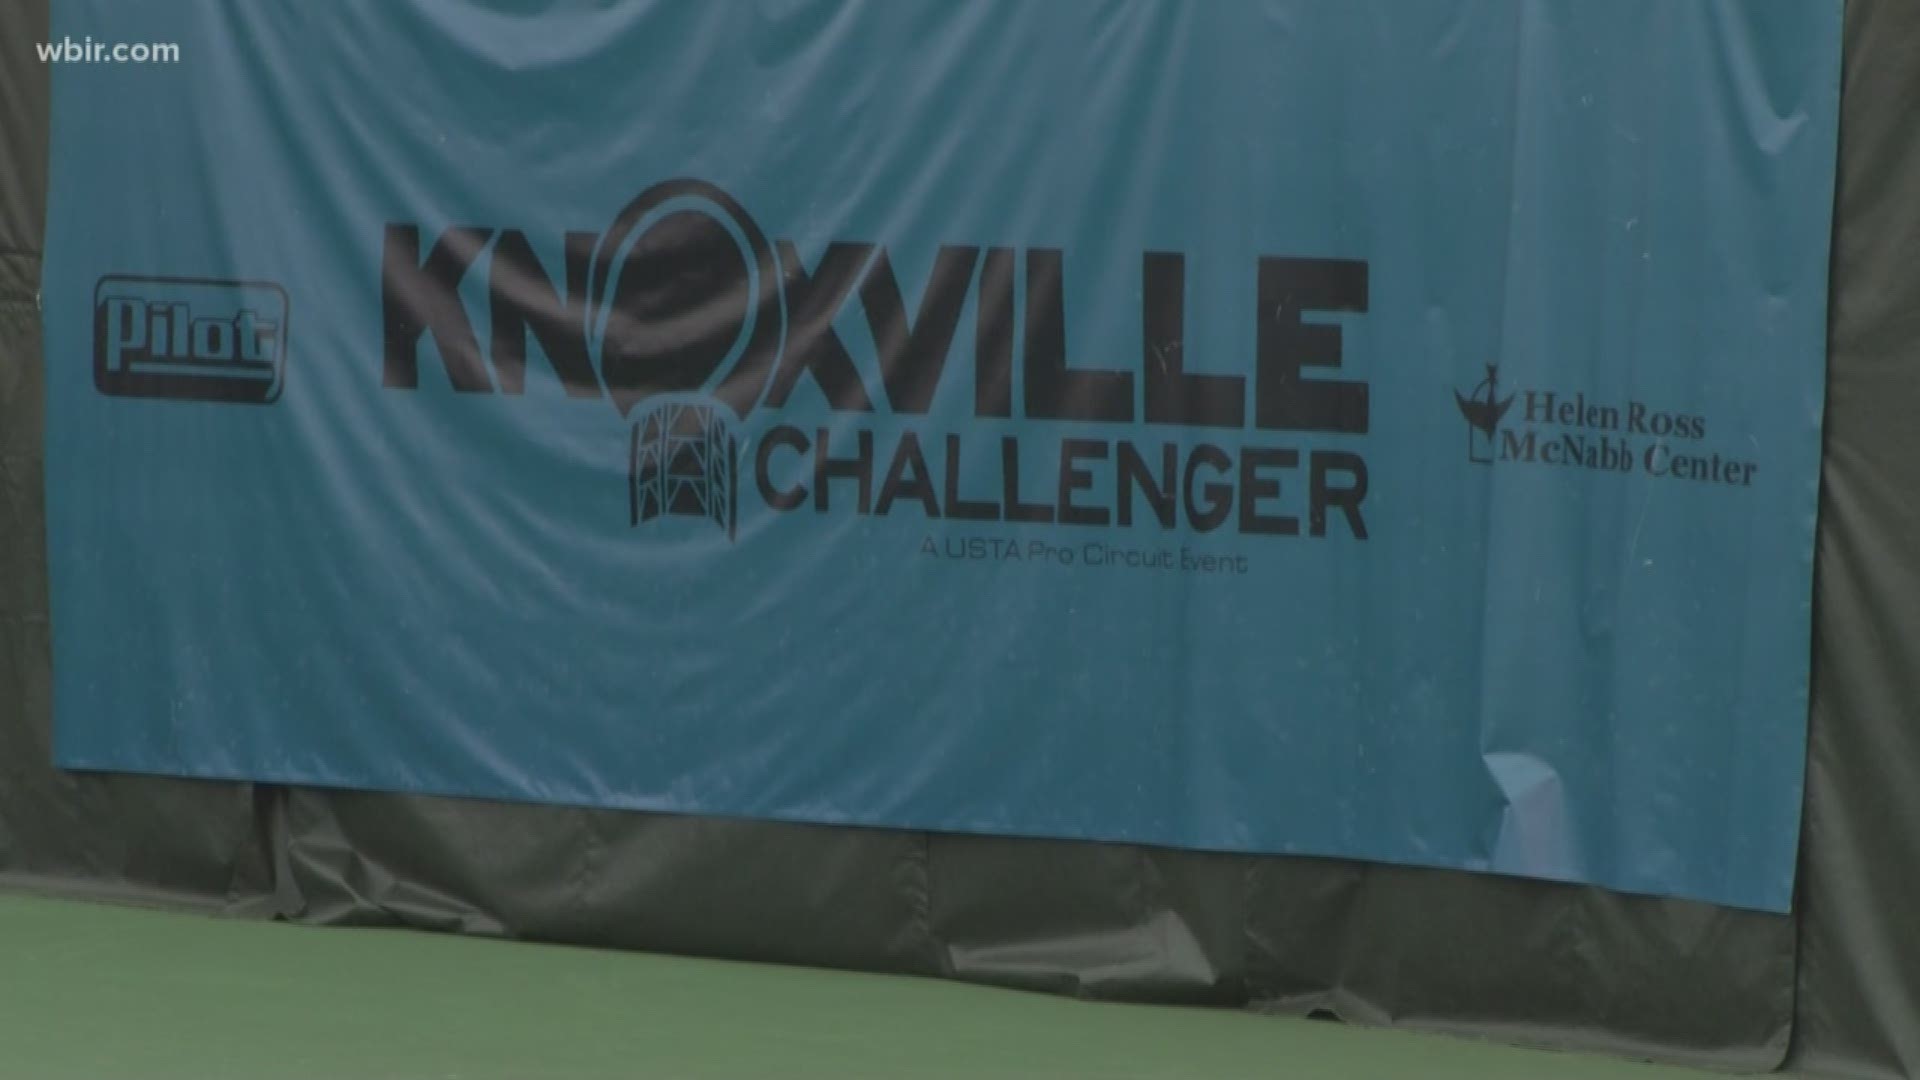 The Knoxville Challenger 2018 Tennis Tournament runs Nov. 6-11, 2018 at the University of Tennessee's Goodfriend Indoor Tennis Center. Benefits Helen Ross McNabb Center. For more information visit knoxchallenger.com
Nov. 5, 2018-4pm